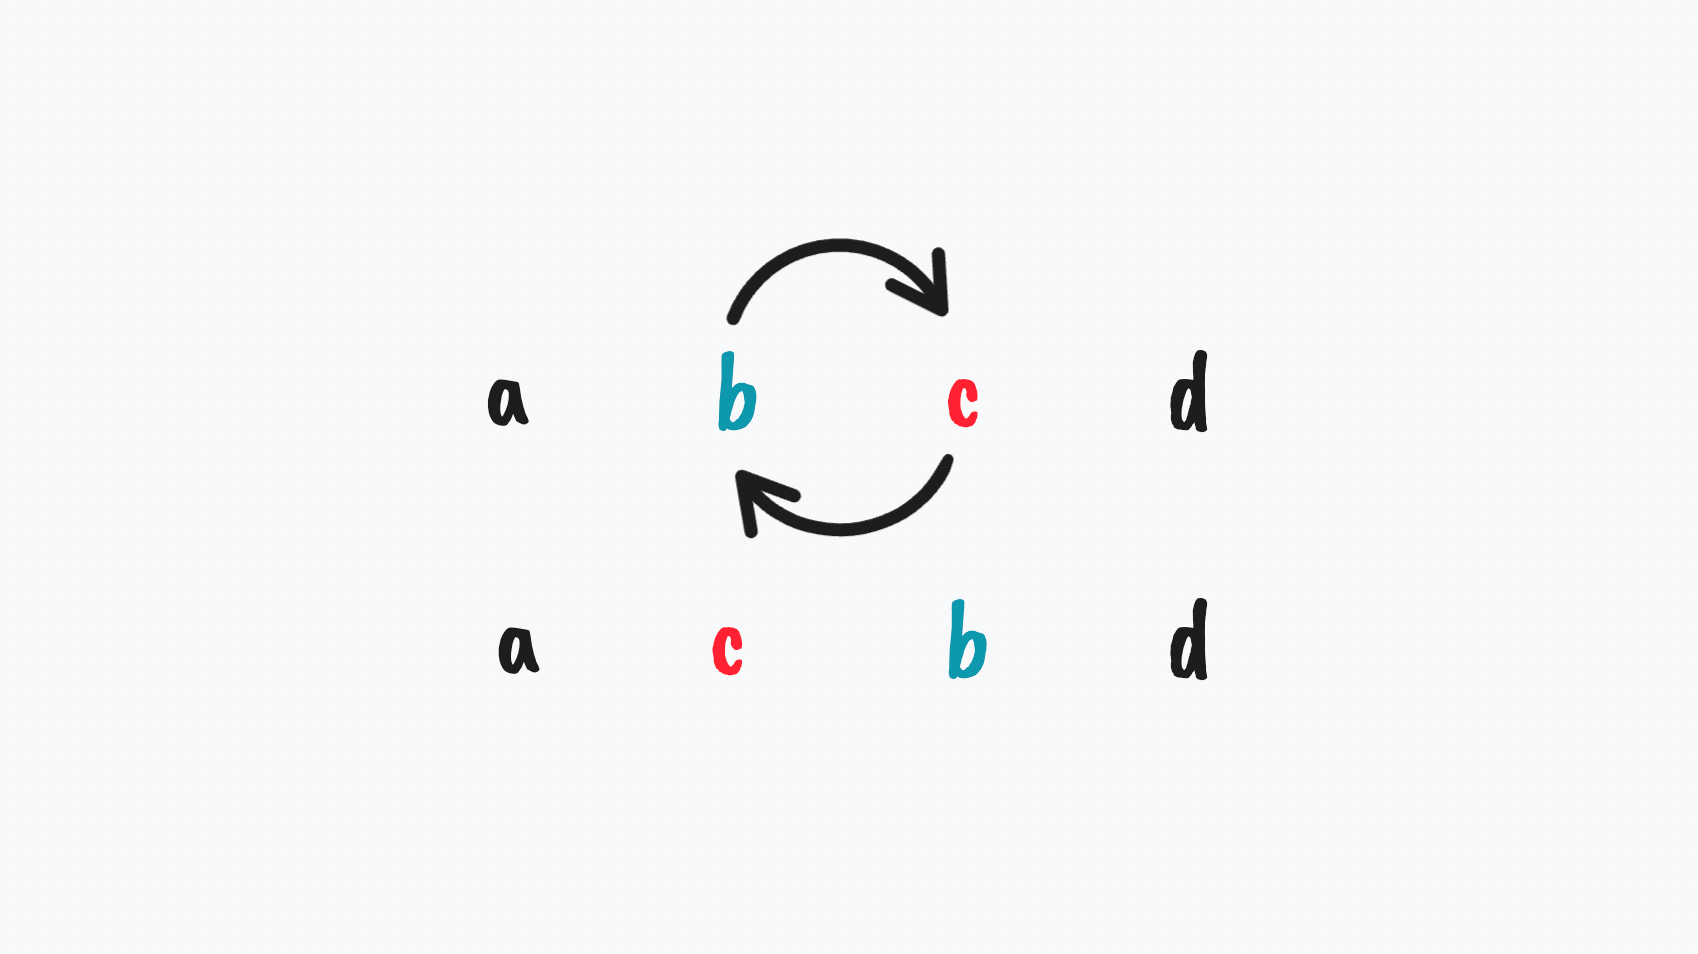 A diagram showing the result of moving c backward in items a, b, c, d.